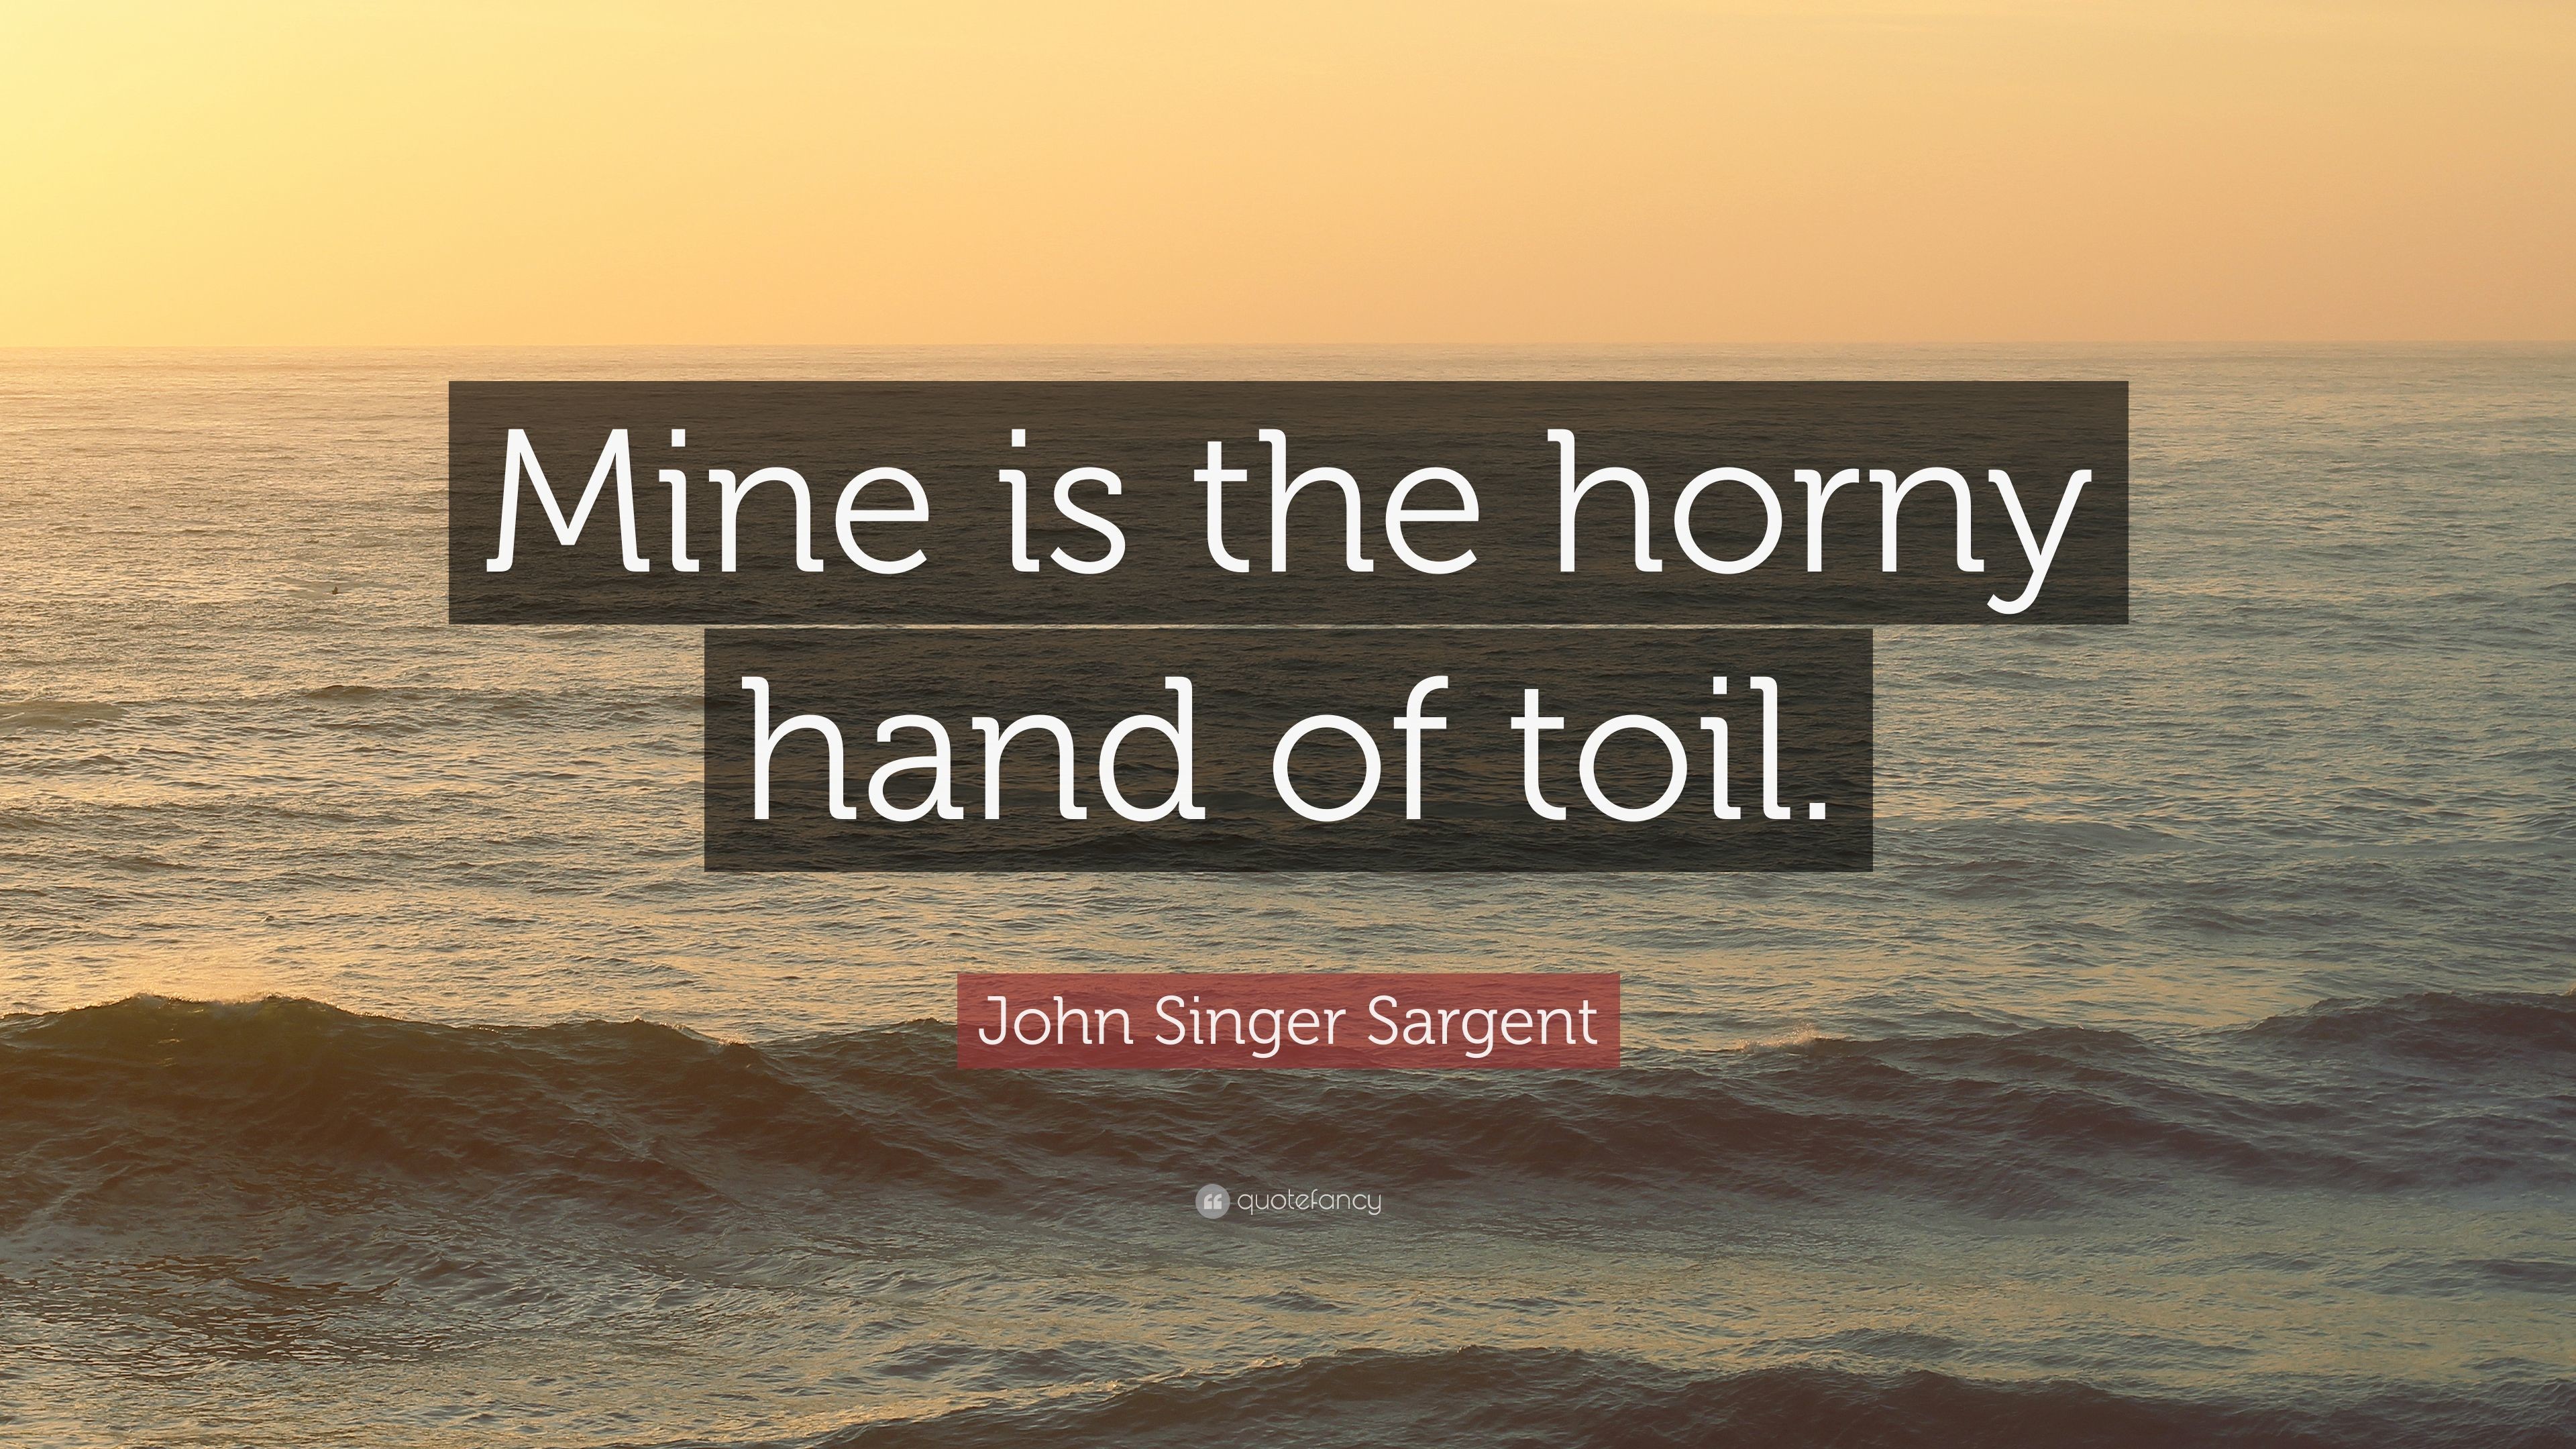 3840x2160 John Singer Sargent Quote: “Mine is the horny hand of toil.”